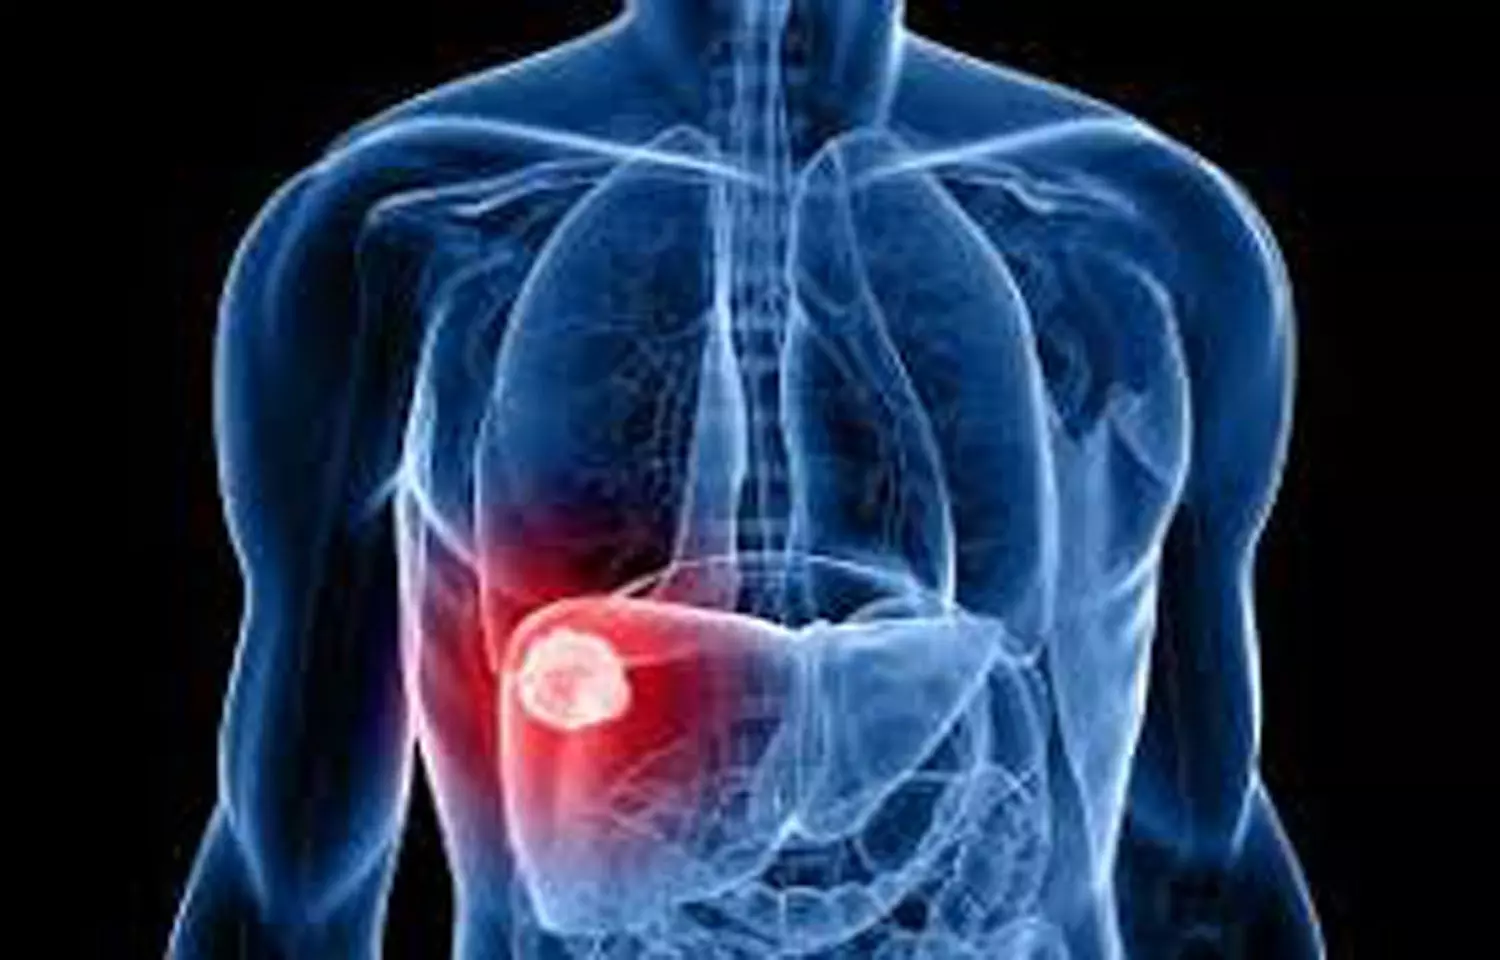 Researchers discover treatment that suppresses liver cancer